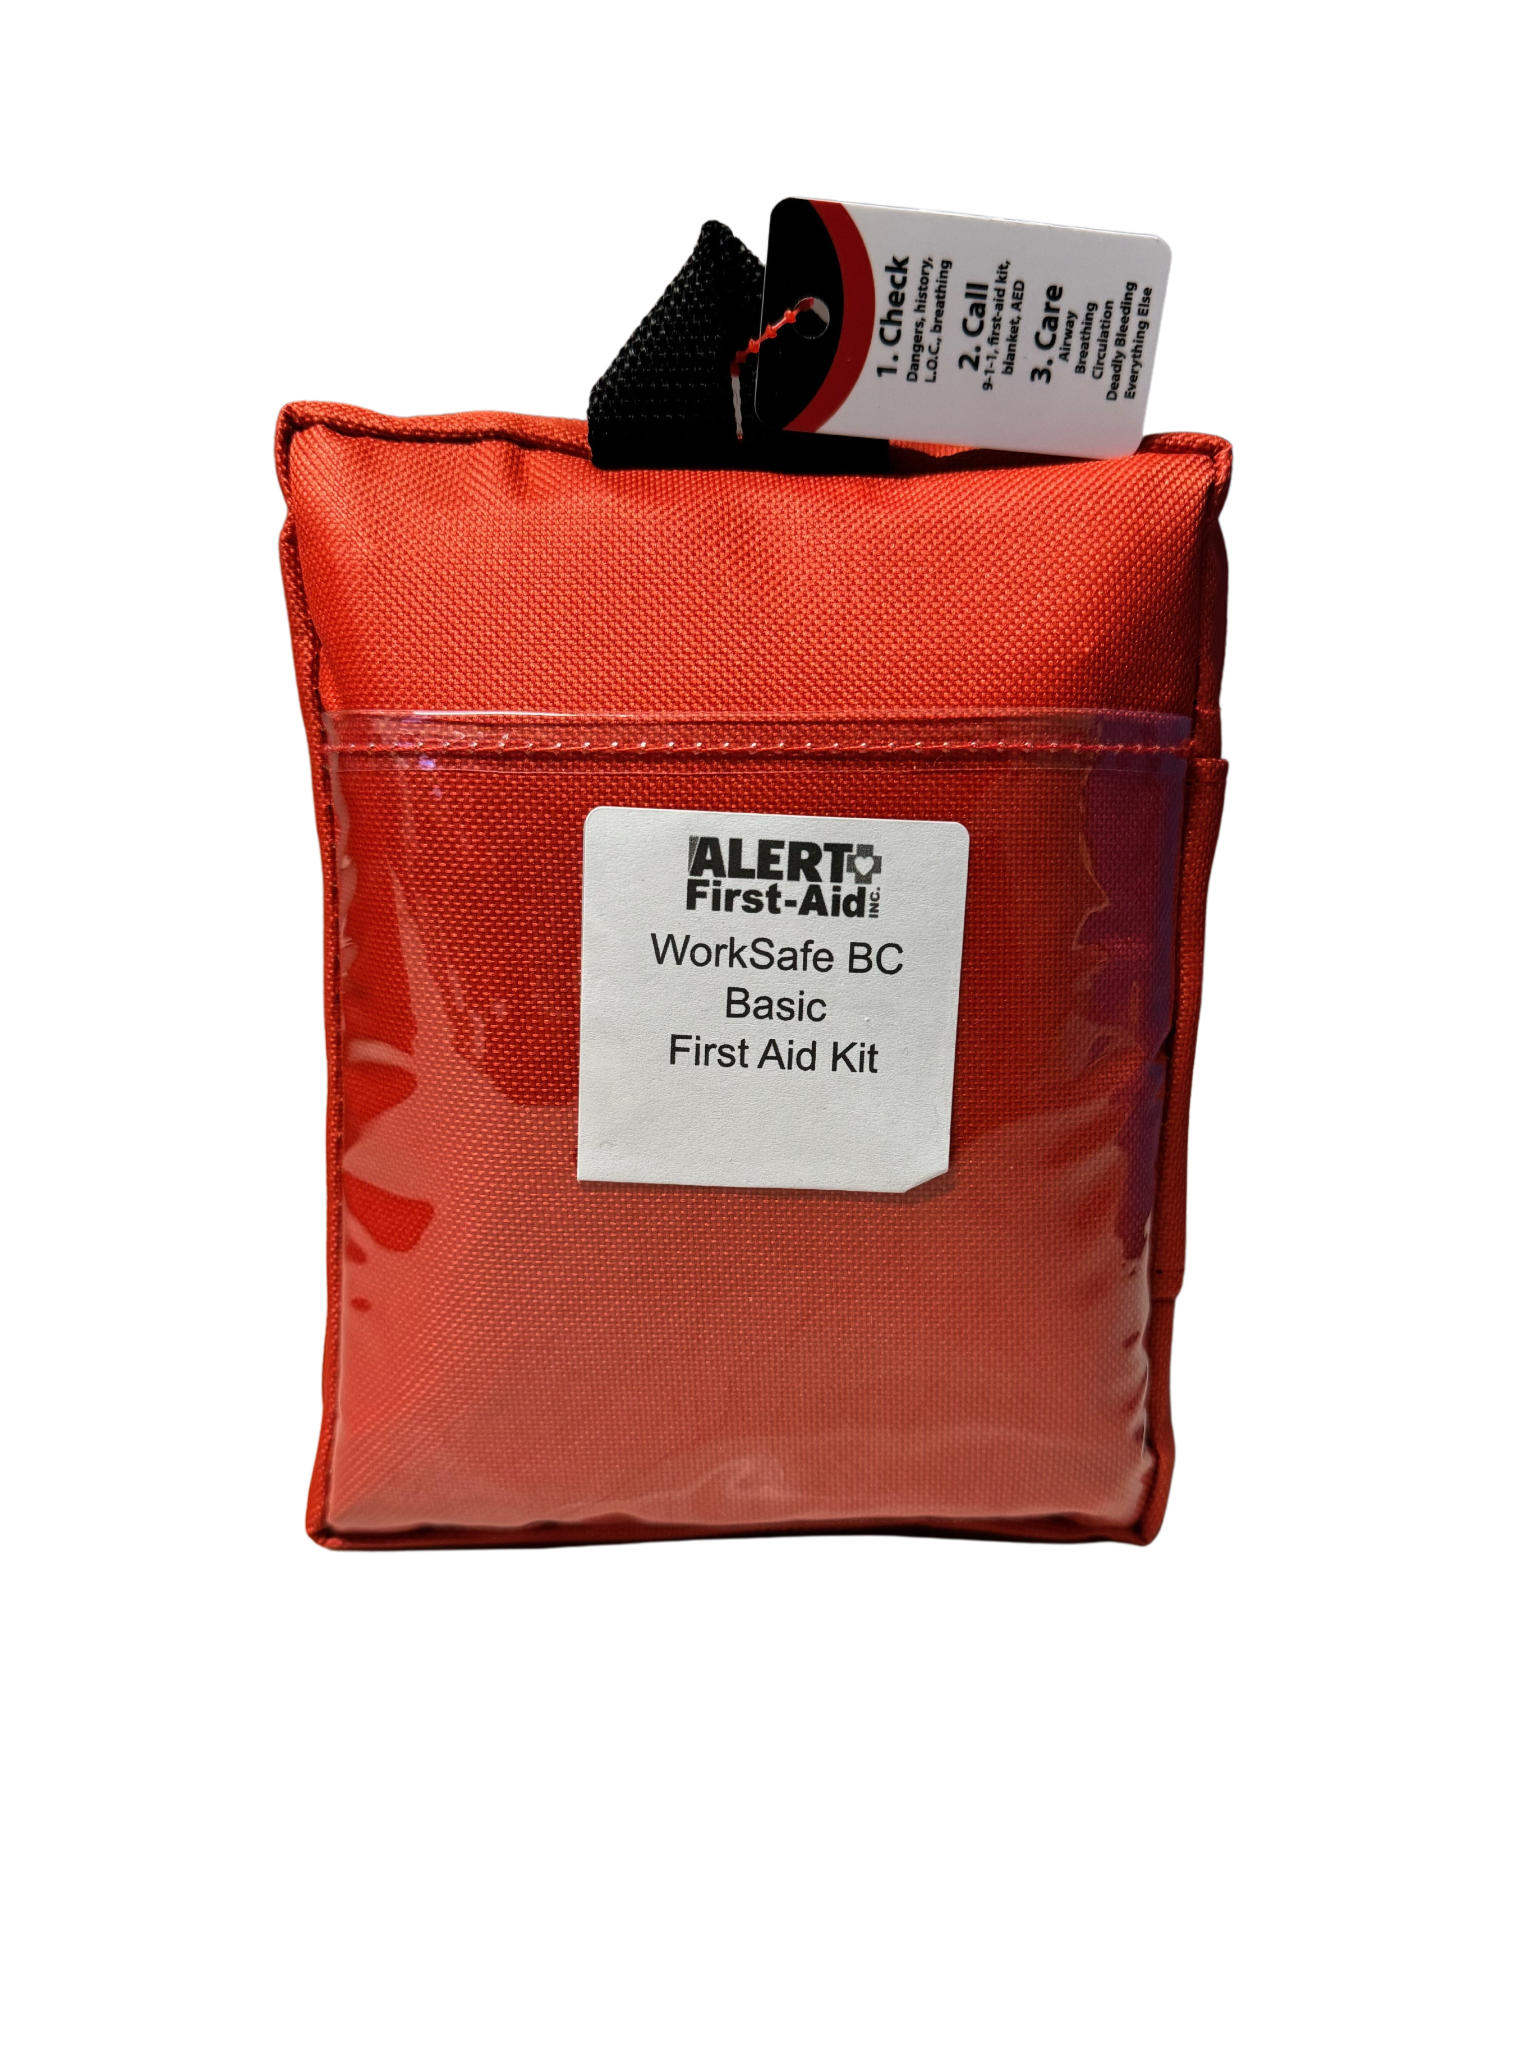 WorkSafeBC Level 1 First Aid Kit